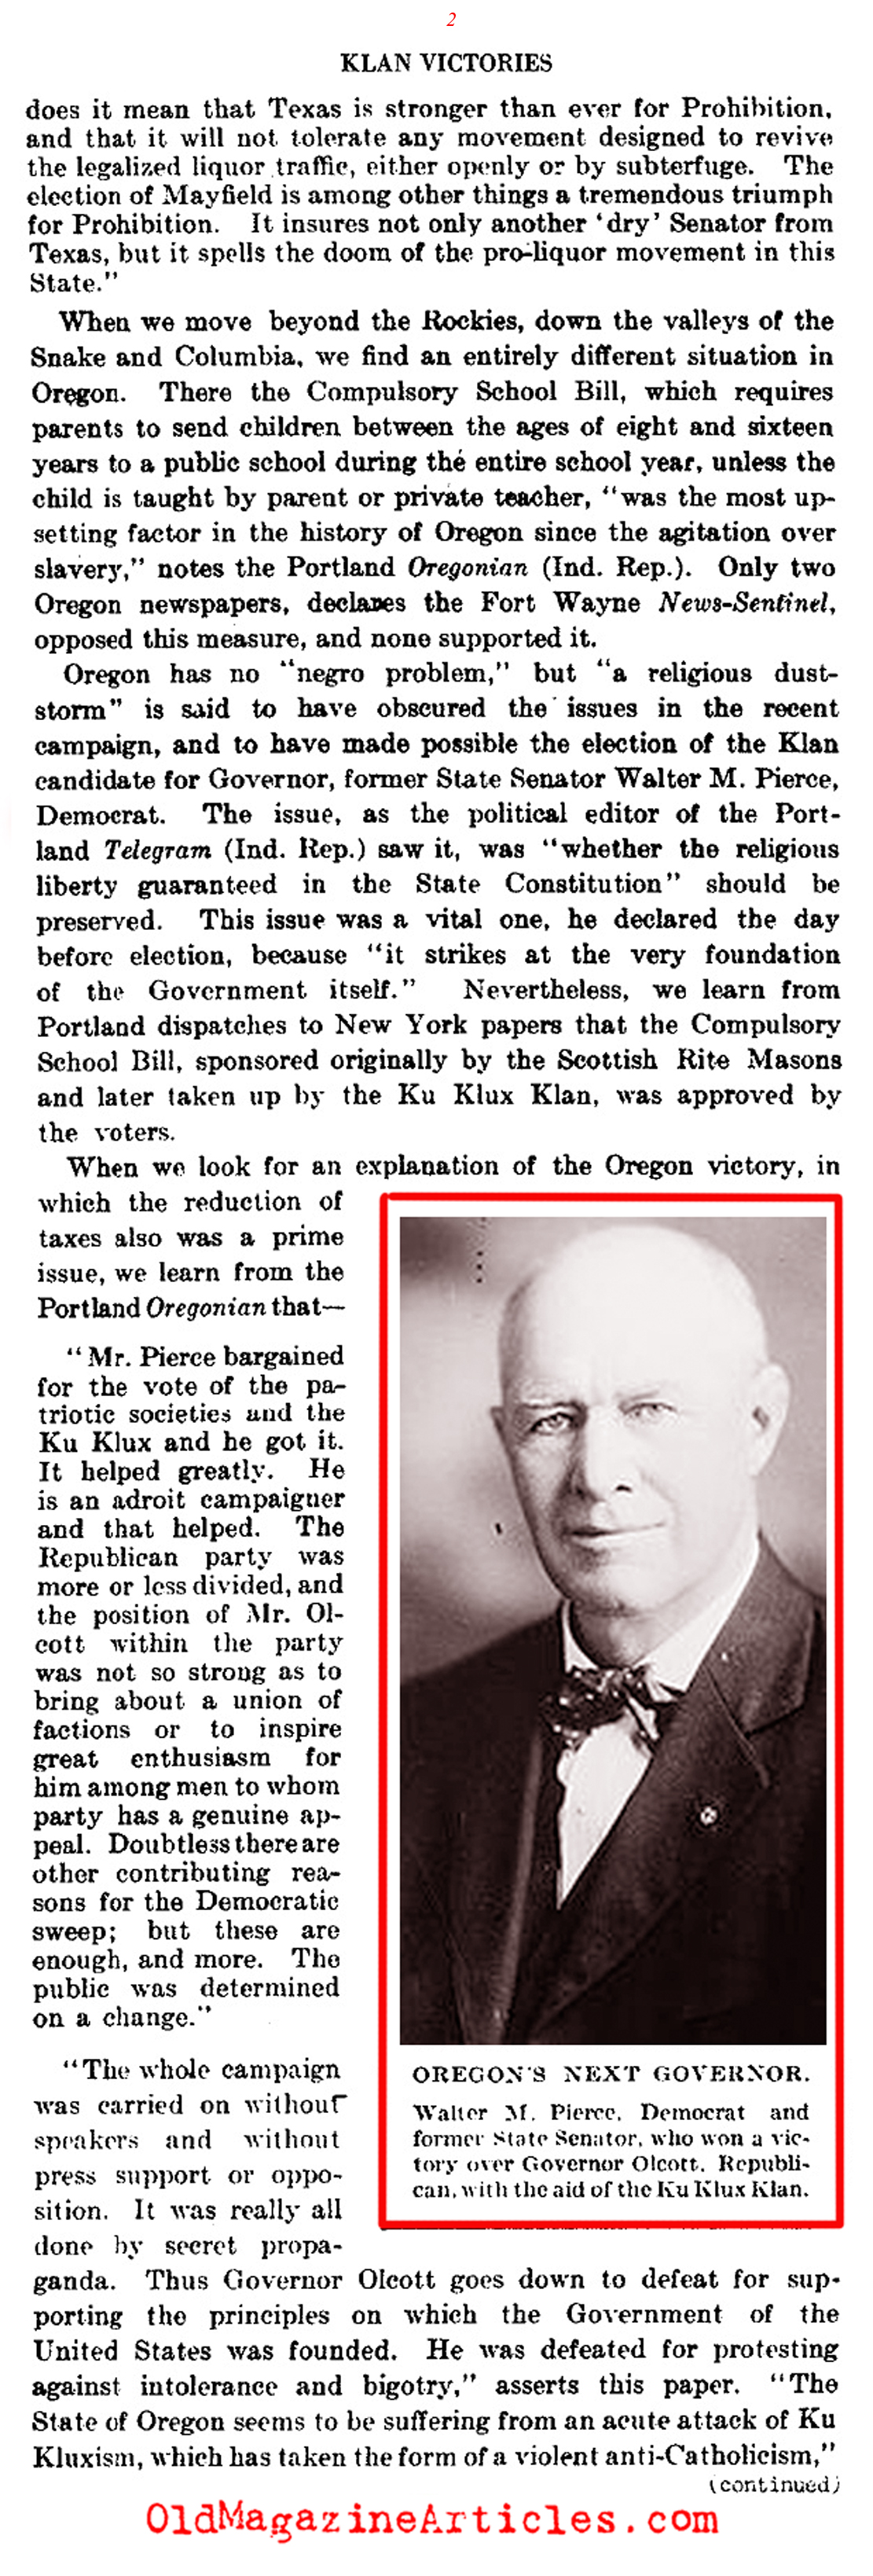 Klan Victories in Oregon and Texas (The Literary Digest, 1922)